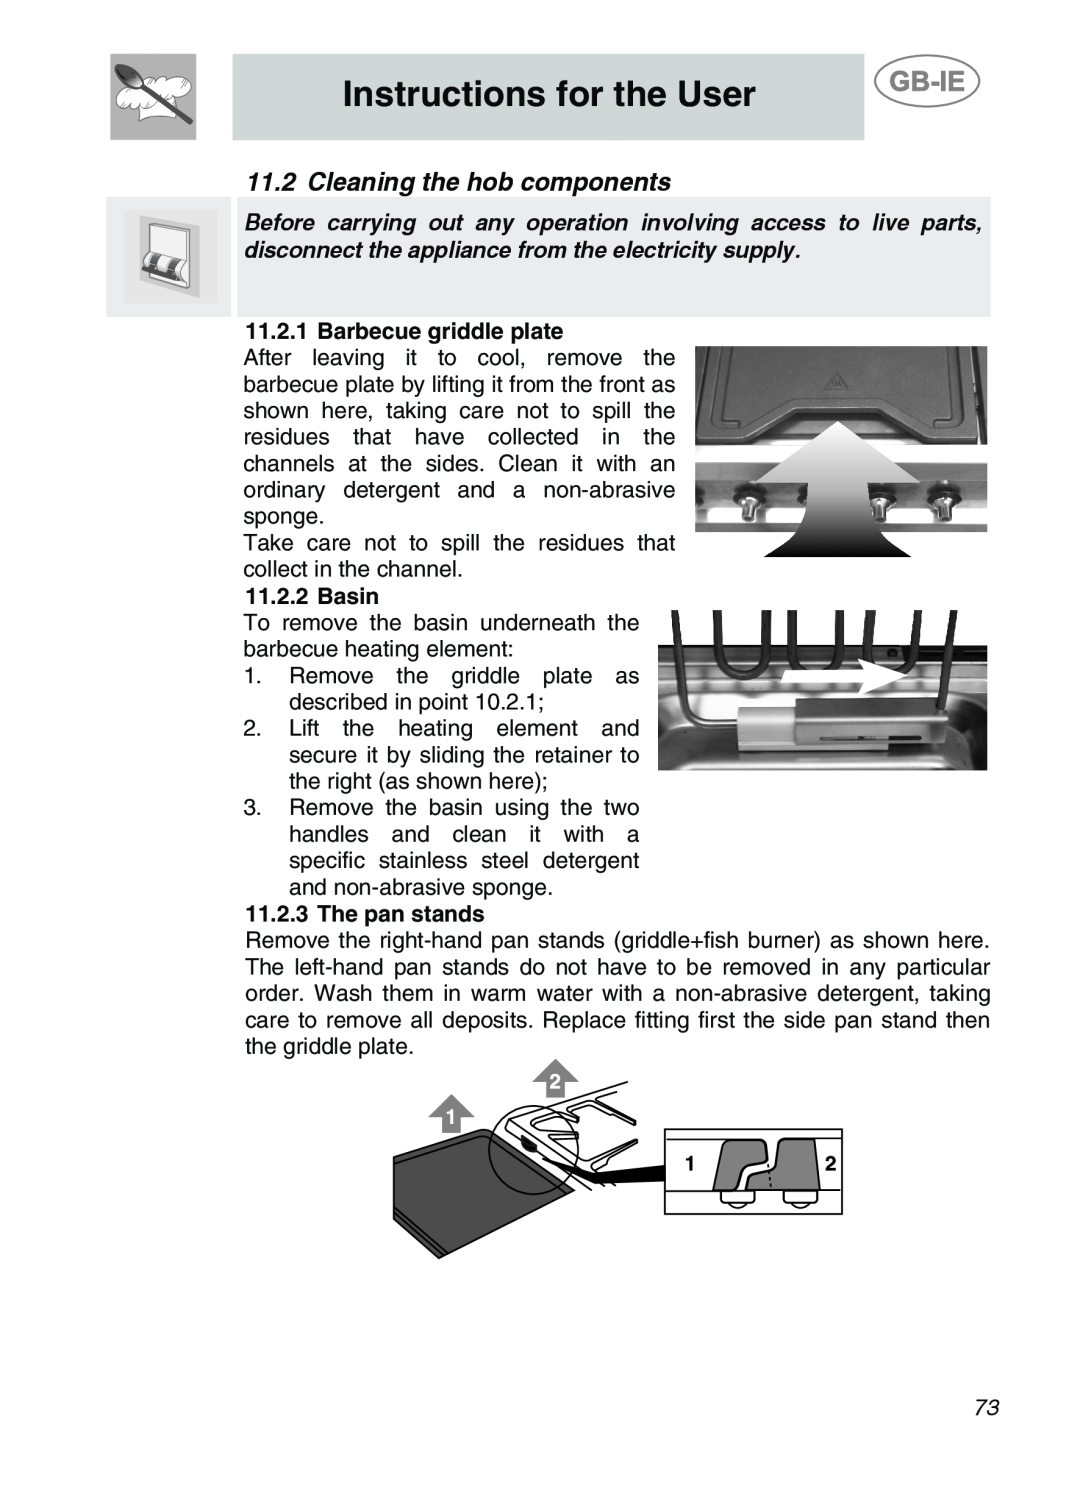 Smeg CS122-6 manual Cleaning the hob components, Barbecue griddle plate, Basin, The pan stands, Instructions for the User 